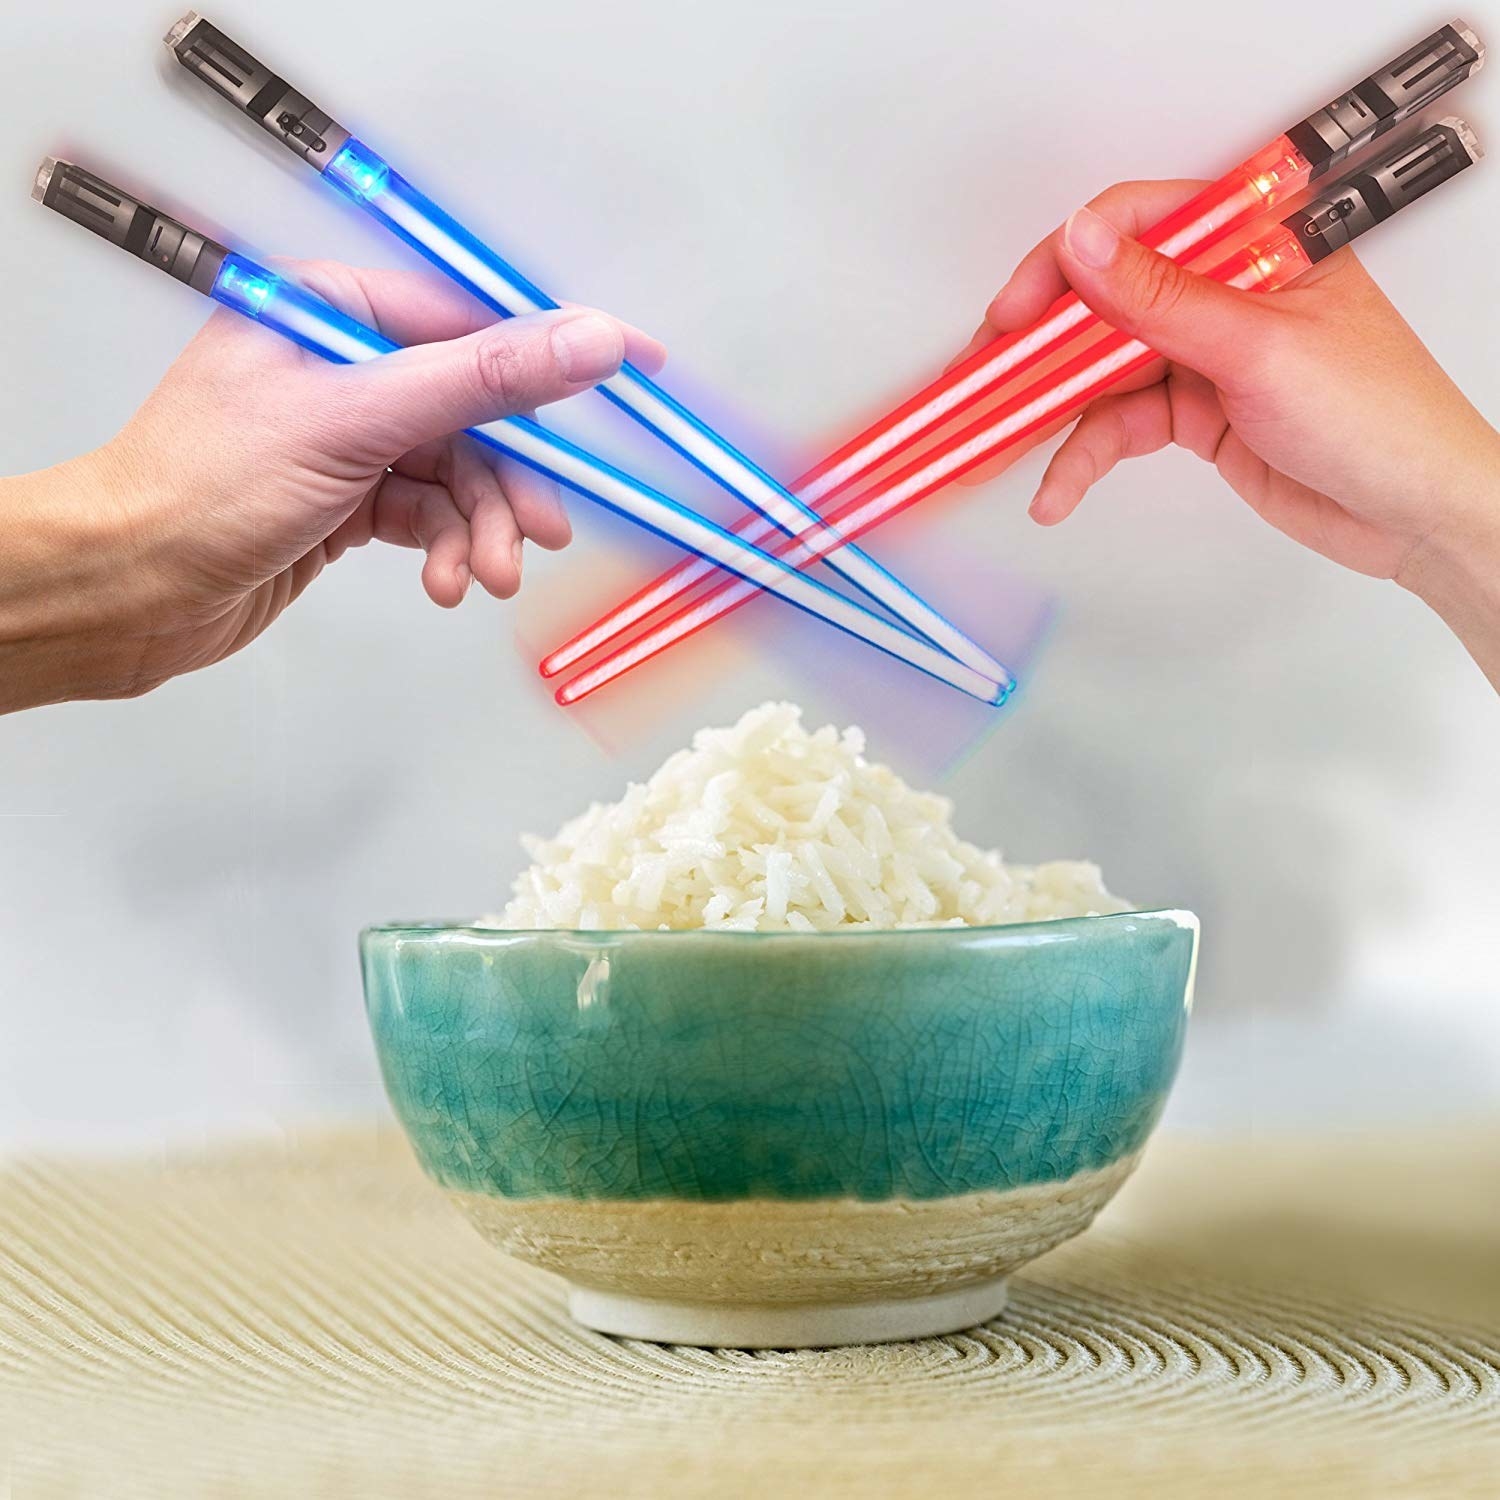 Two models battling over rice with the light-up chopsticks